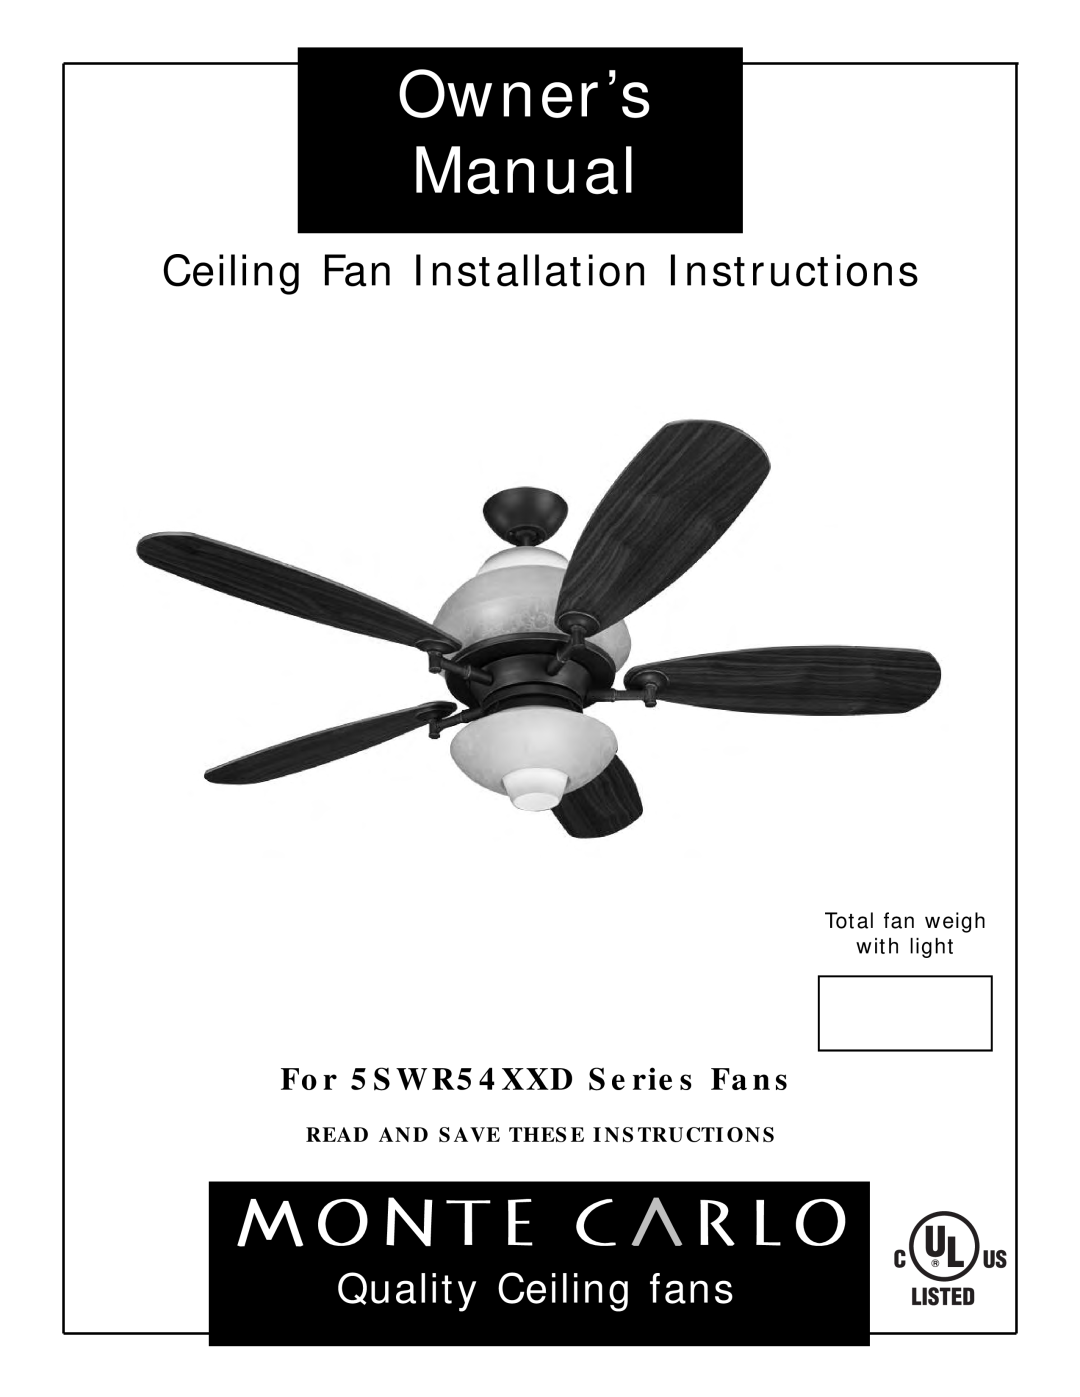 Monte Carlo Fan Company 5SWR54XXD Series owner manual Ceiling Fan Installation Instructions, Quality Ceiling fans 